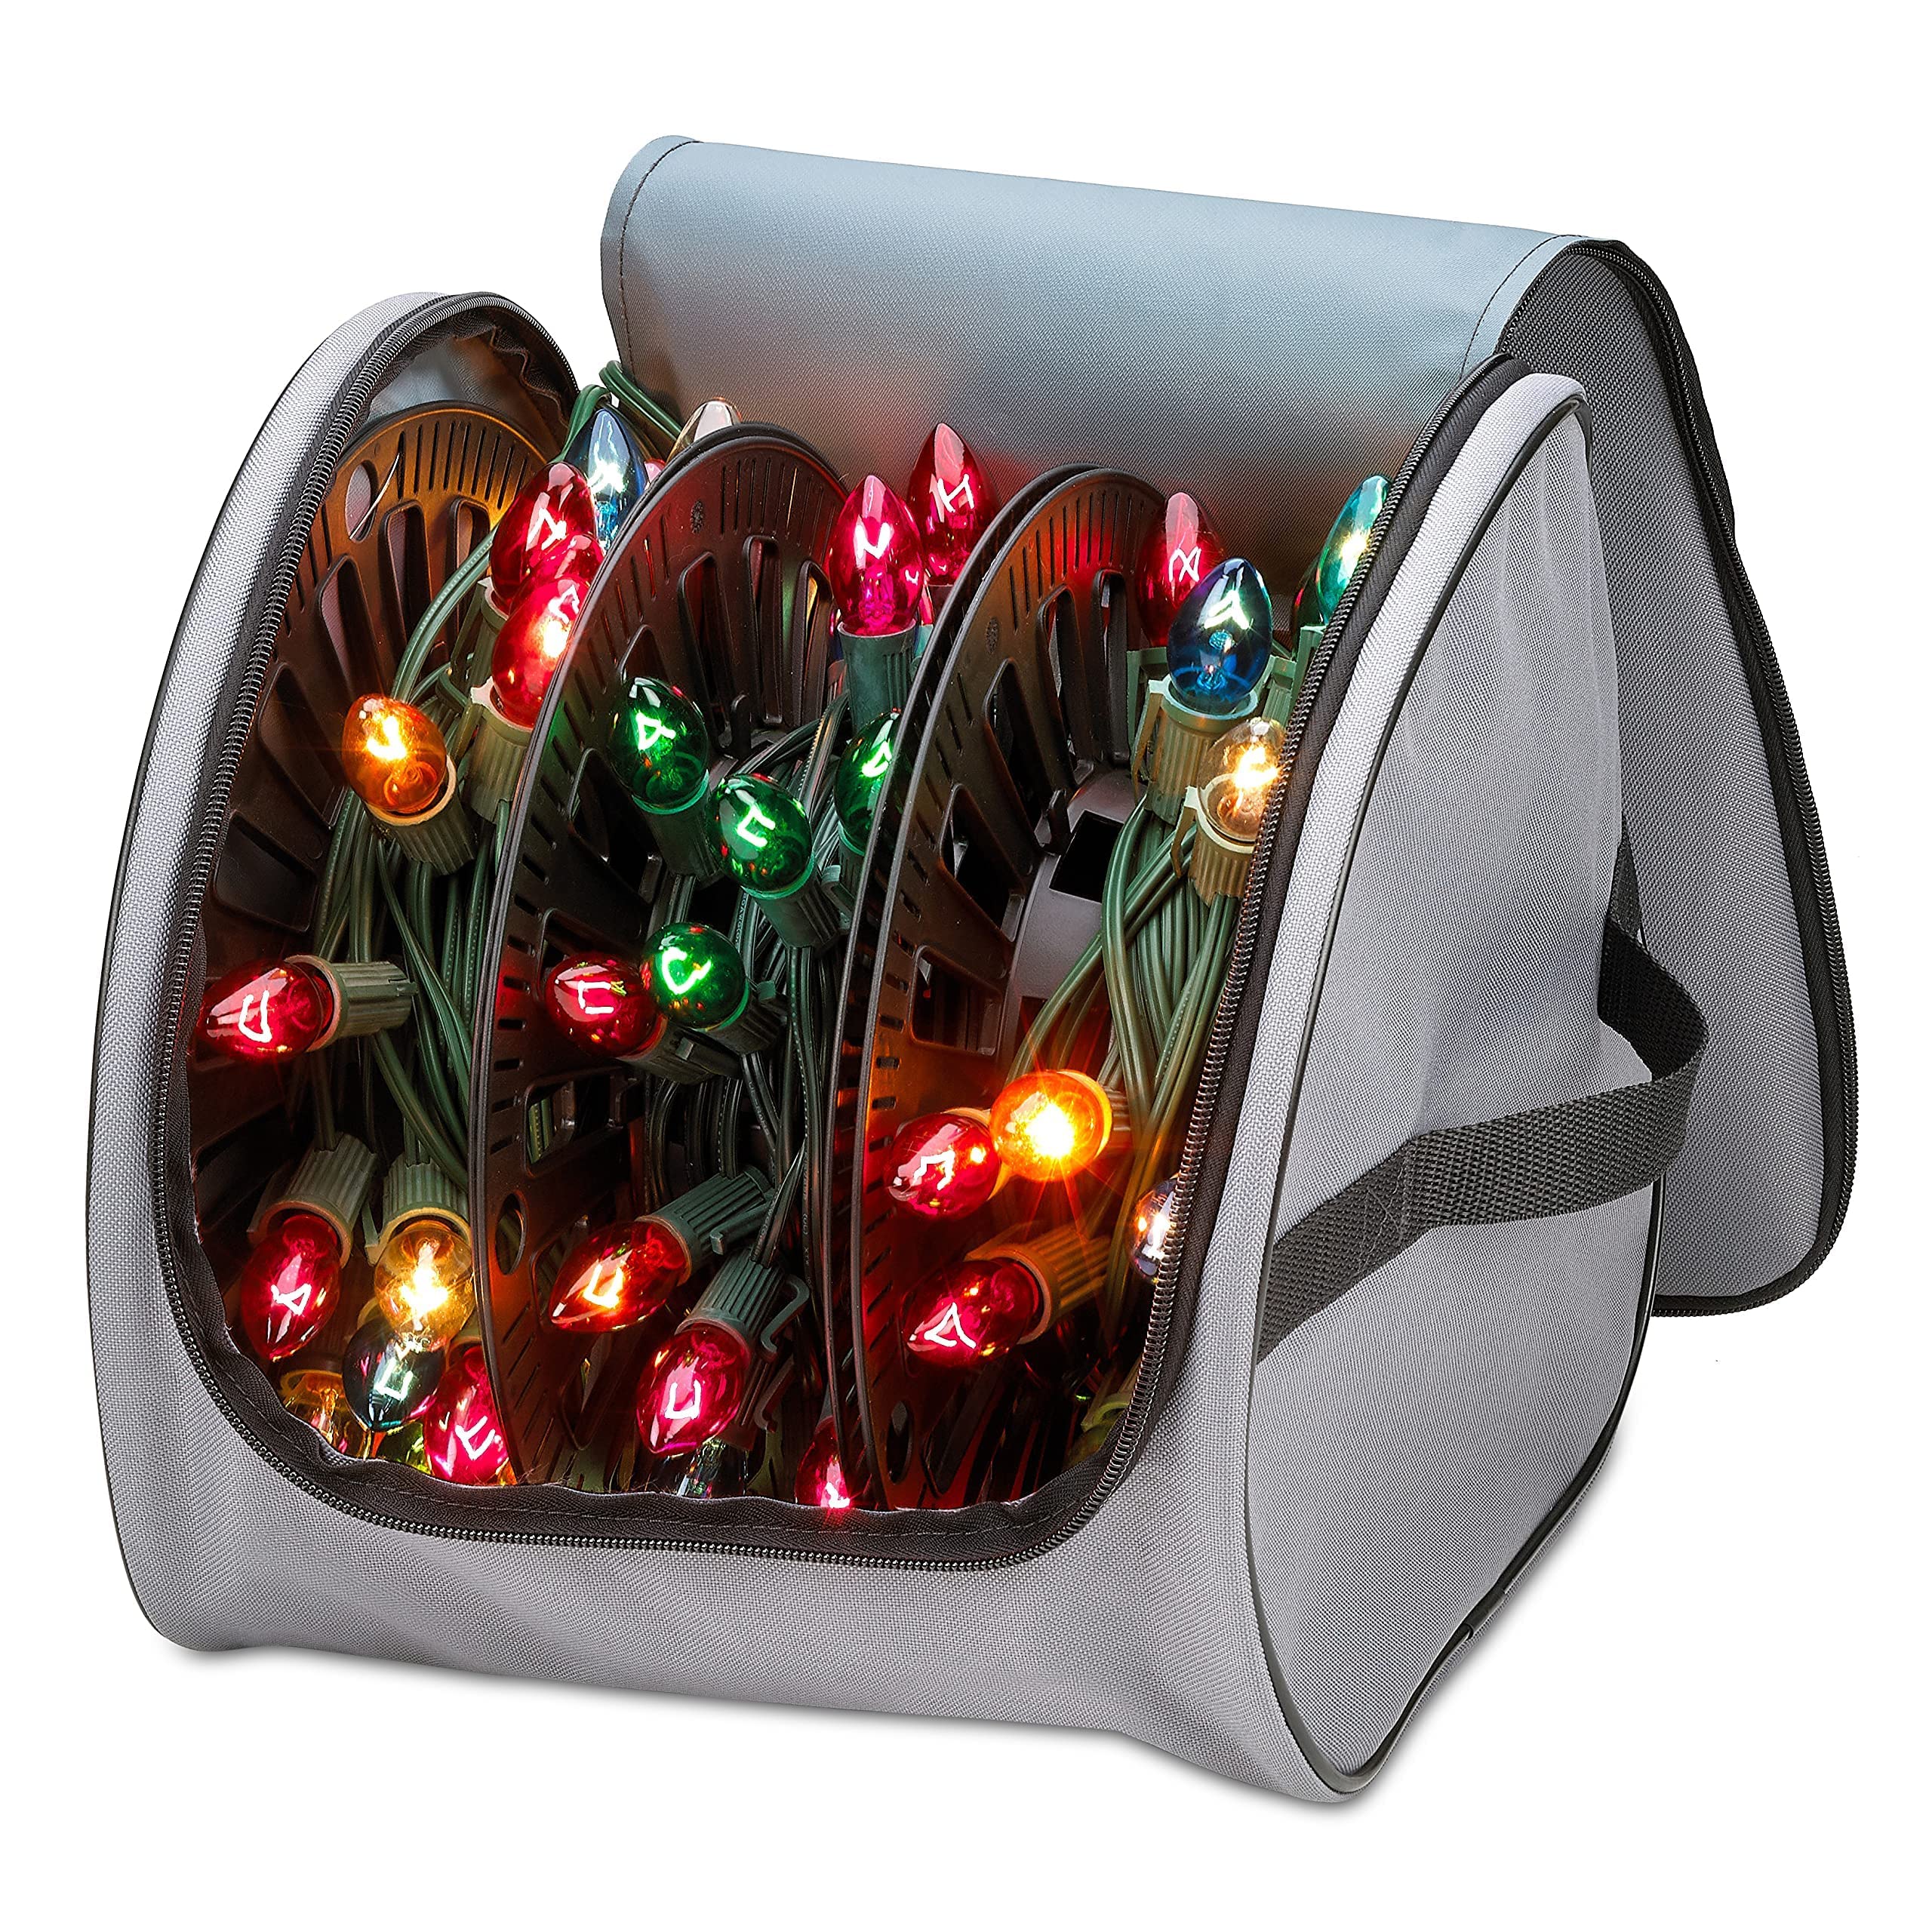 Premium Christmas Light Storage Bag – Heavy Duty Tear Proof 600D/Inside PVC Material with Reinforced Handles - with 3 Reels Stores up to 375 Ft of Mini Christmas Tree Lights & Extension Cords  - Like New